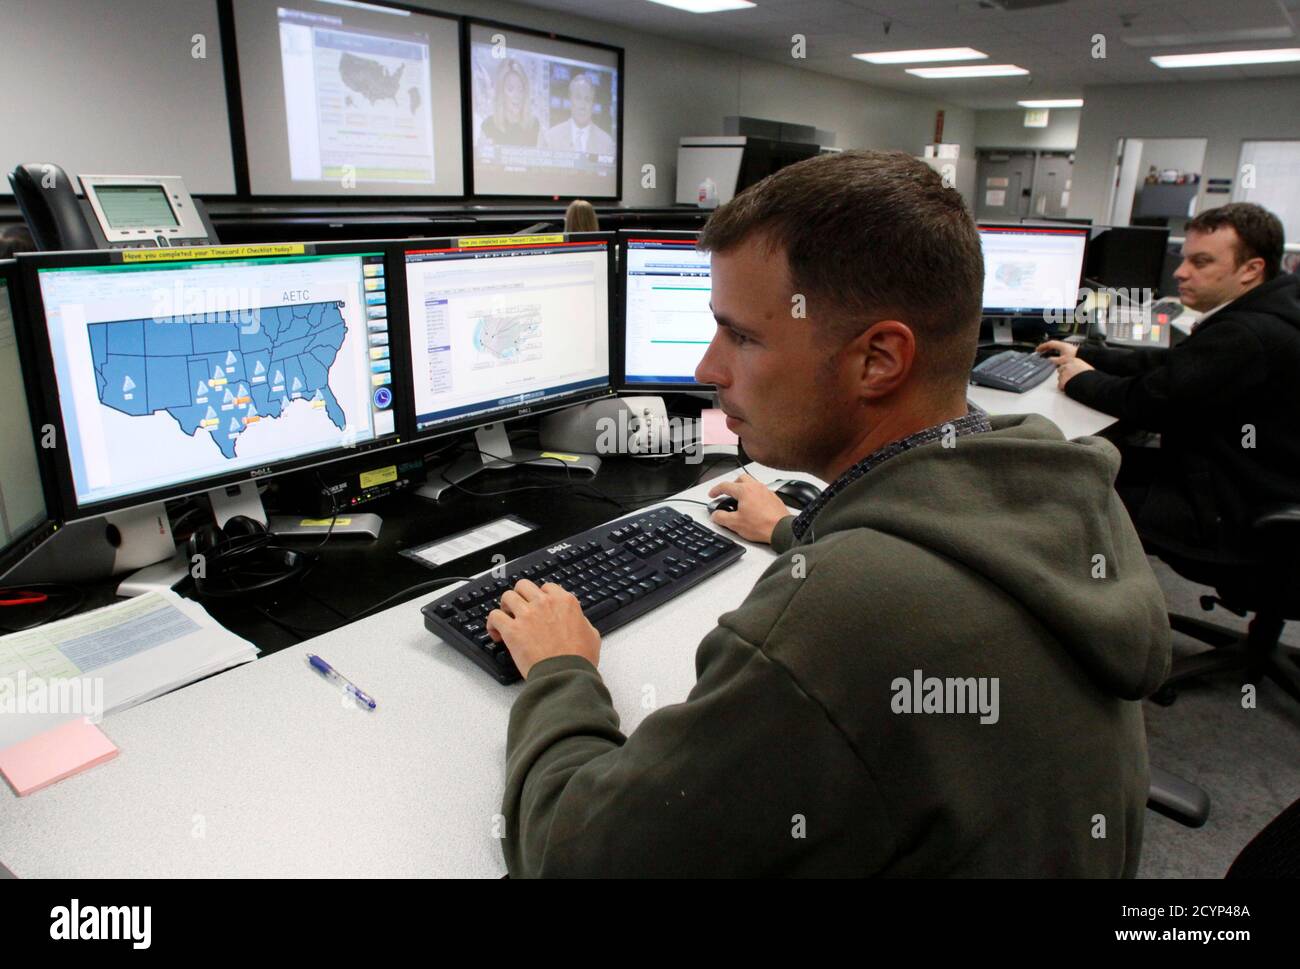 Josh Mayeux, network defender, works at the Air Force Space Command Network Operations & Security Center at Peterson Air Force Base in Colorado Springs, Colorado July 20, 2010. U.S. national security planners are proposing that the 21st century's critical infrastructure -- power grids, communications, water utilities, financial networks -- be similarly shielded from cyber marauders and other foes. The ramparts would be virtual, their perimeters policed by the Pentagon and backed by digital weapons capable of circling the globe in milliseconds to knock out targets.  To match Special Report  USA Stock Photo